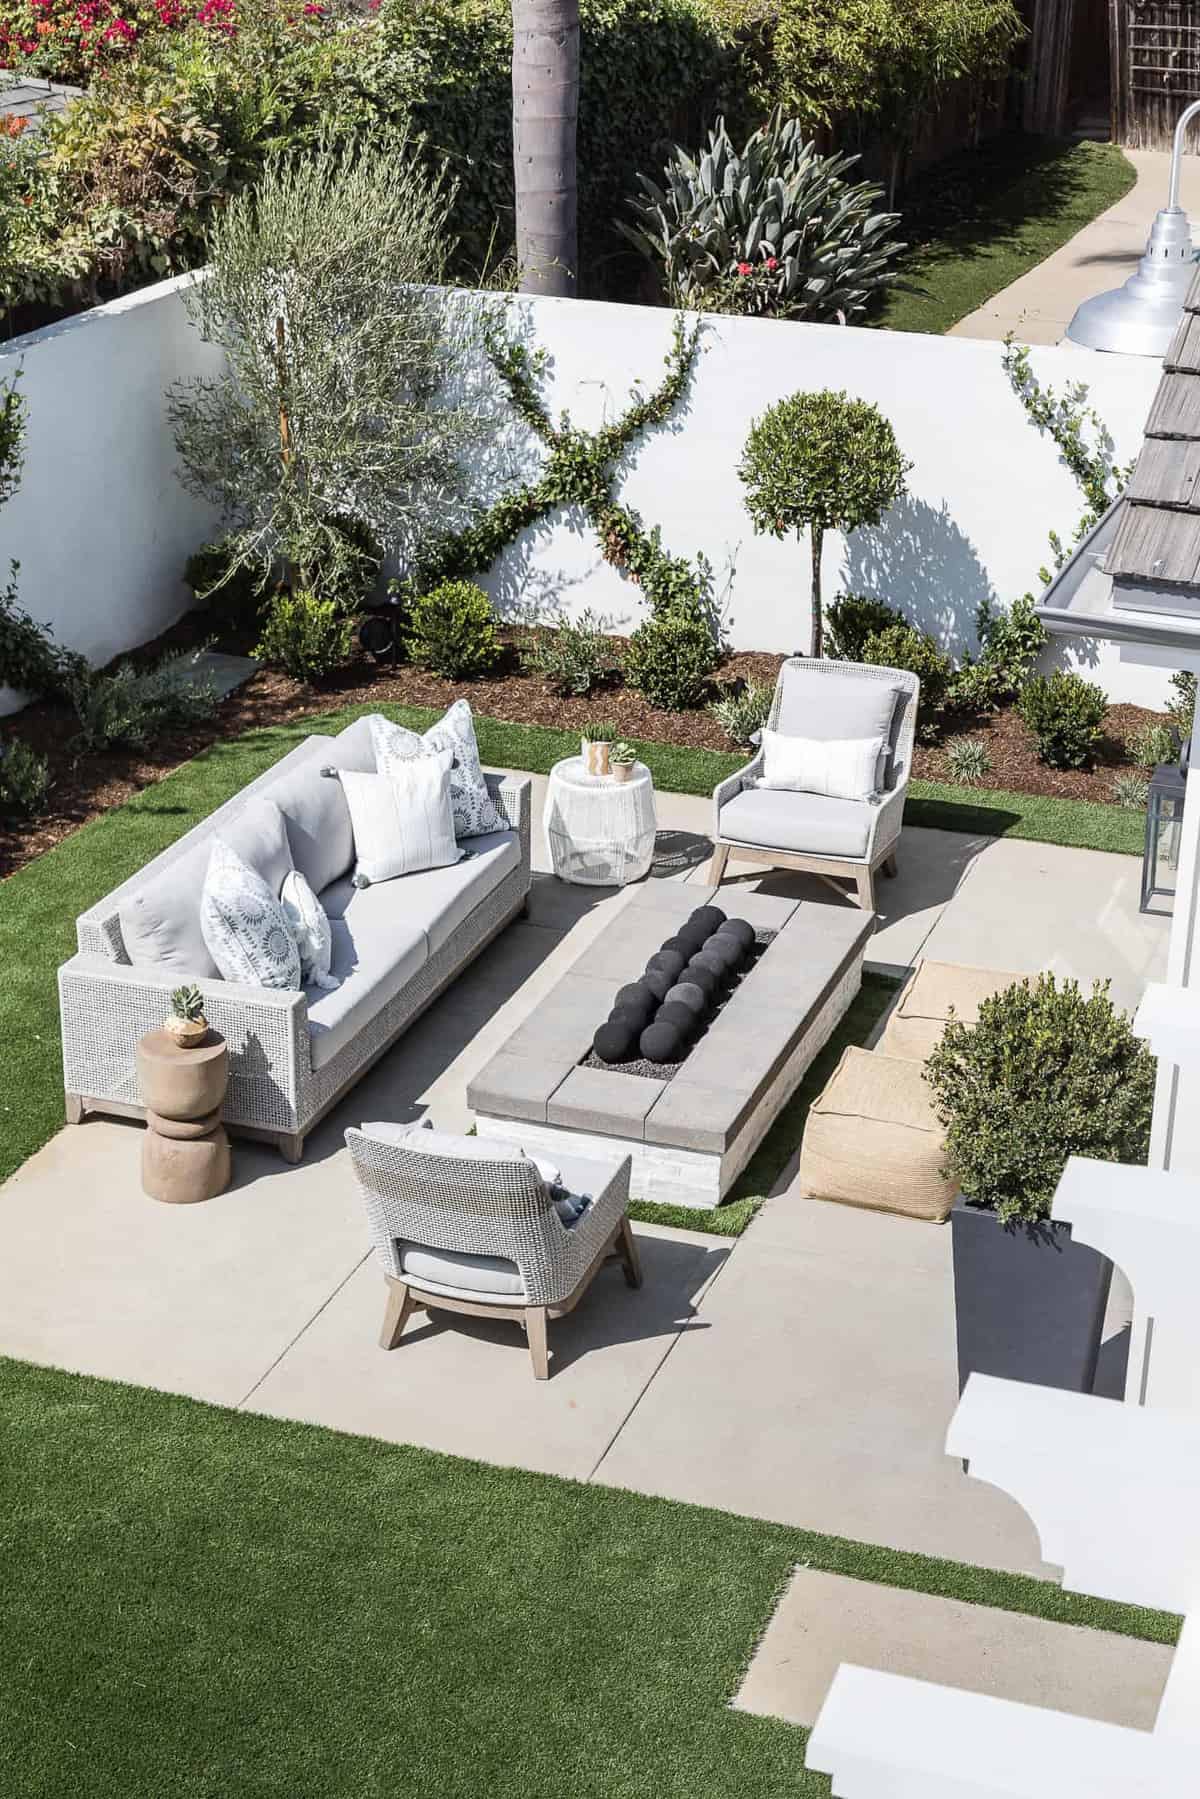 seating area outside on a patio with a sofa, 2 chairs and a table made from a rectangular fire pit